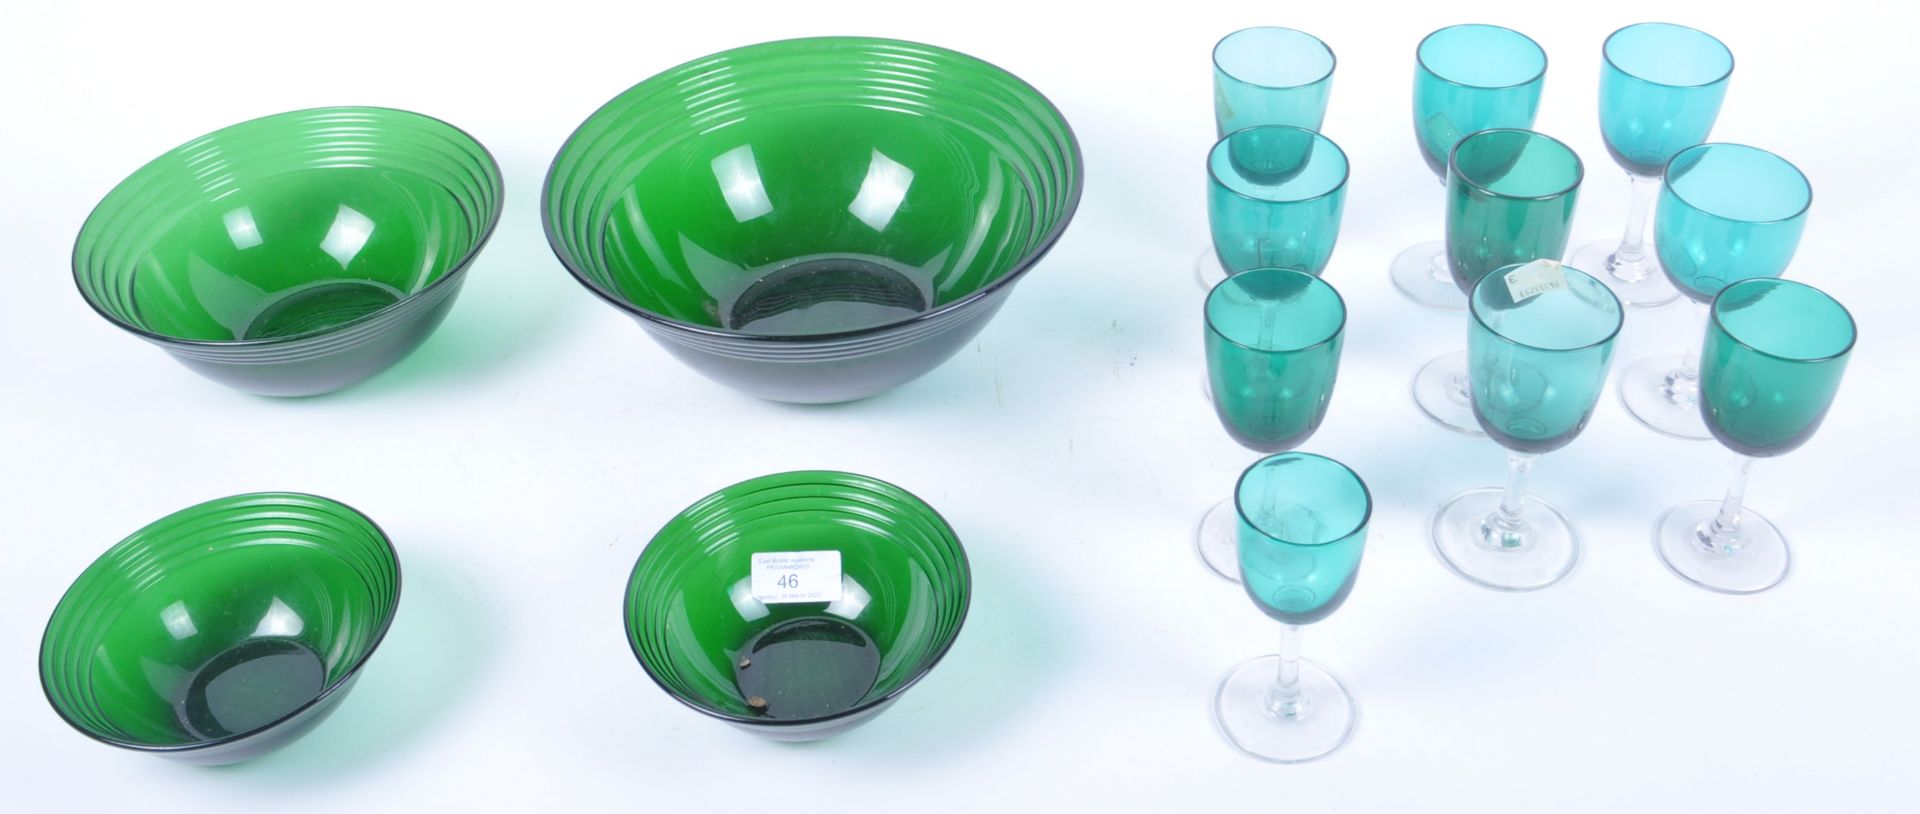 SERIES OF 3 EARLY 20TH CENTURY GREEN GLASS GRADUATING BOWLS - Image 2 of 4